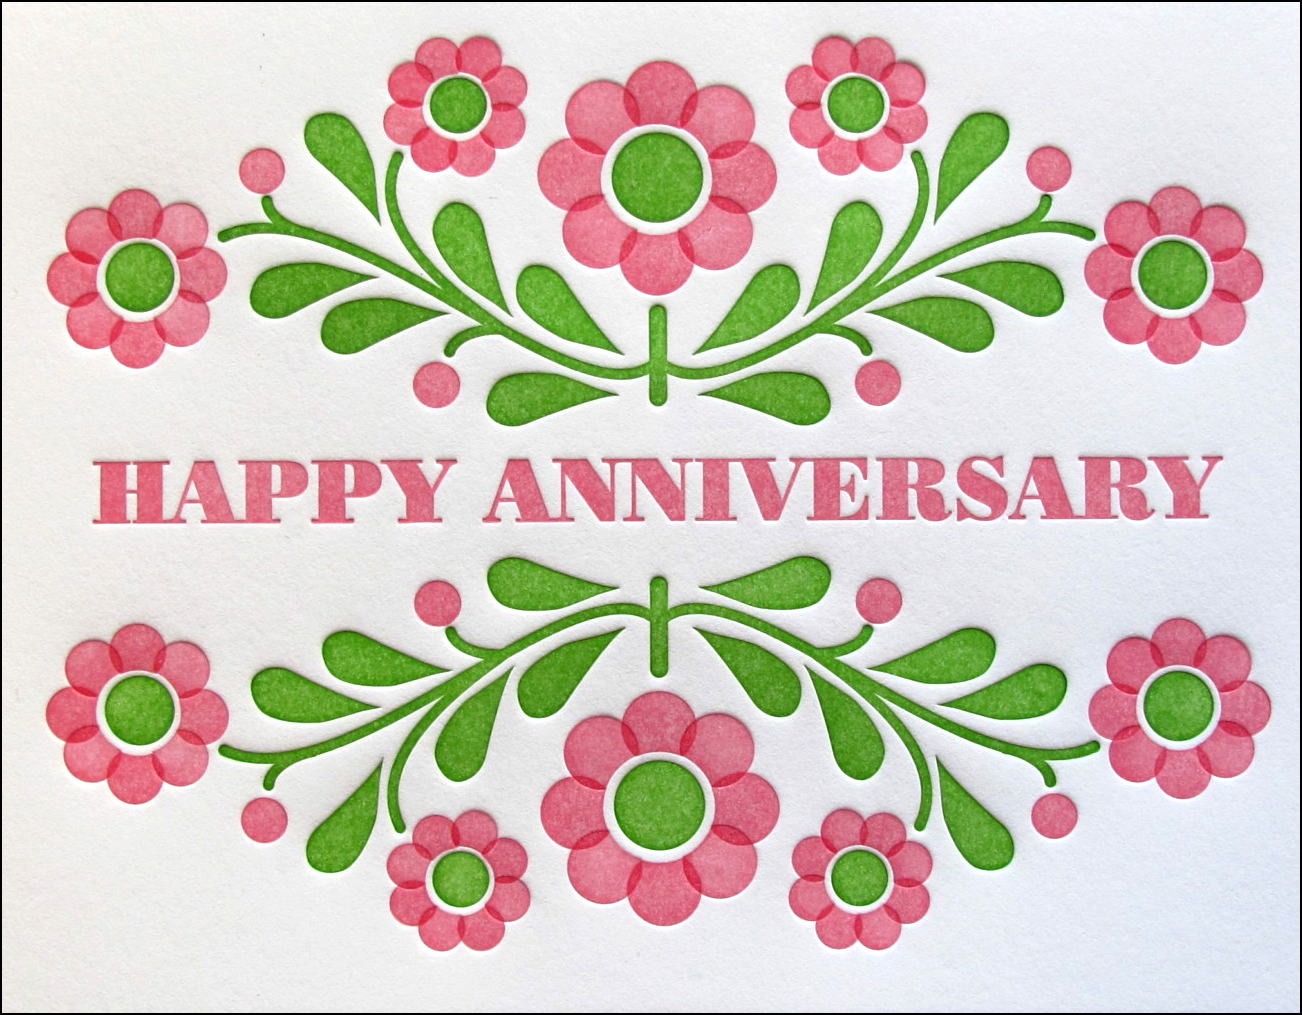 free clipart images wedding anniversary - photo #40